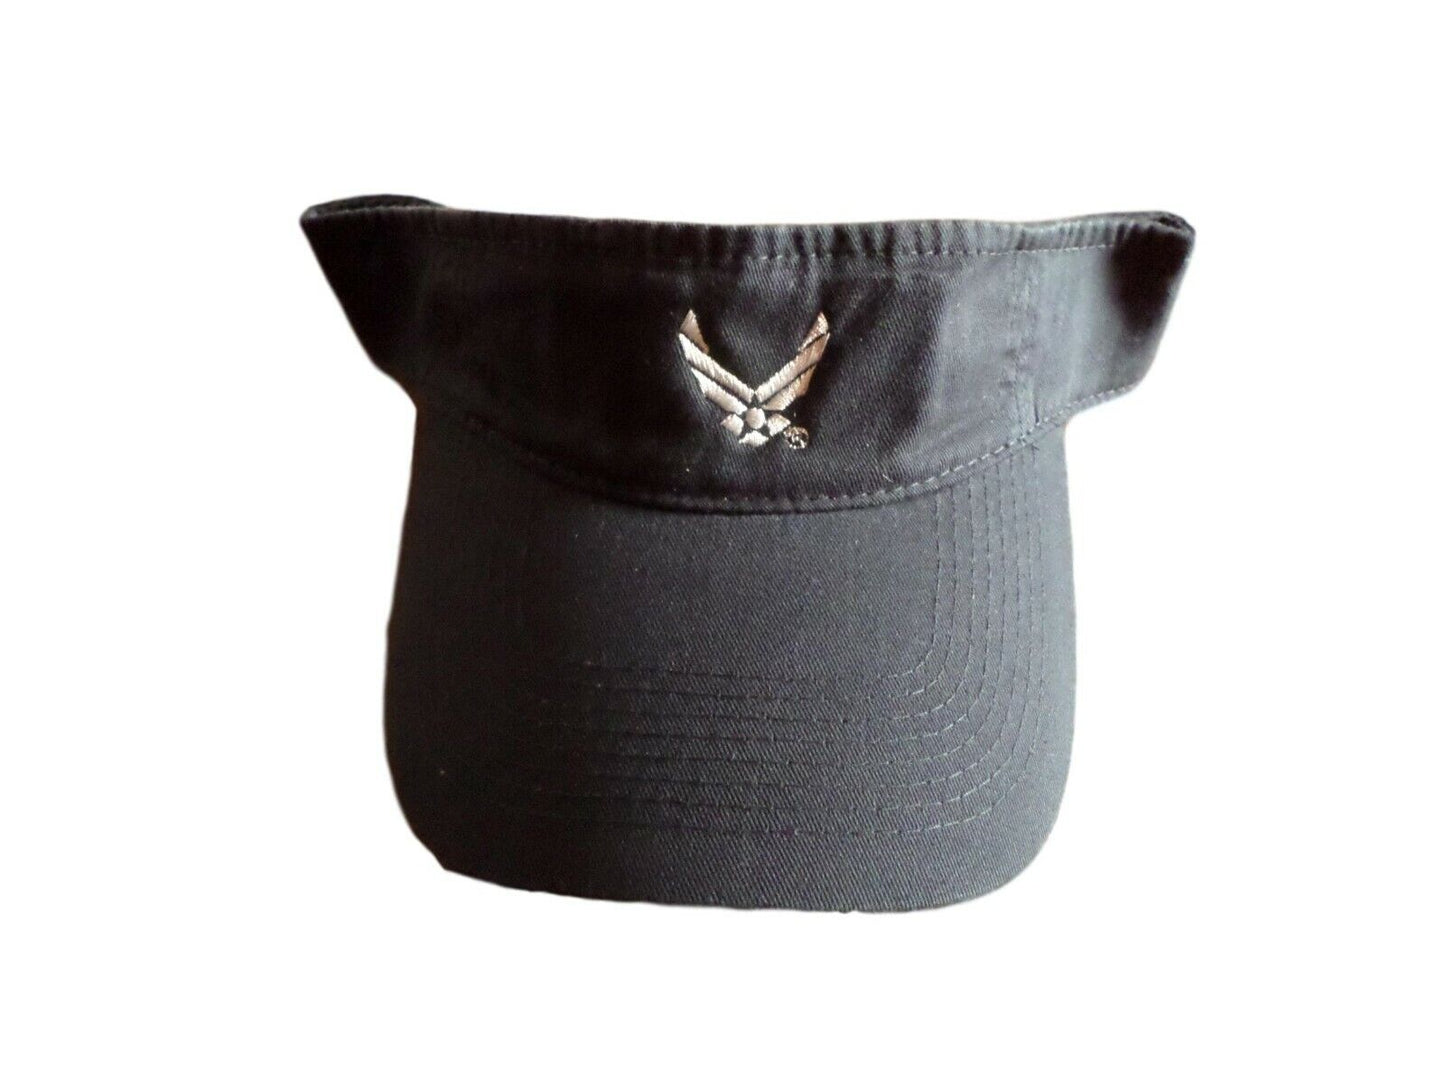 U.S AIR FORCE SUN VISOR CAP BLUE HAT WITH EMBROIDERED AIR FORCE WINGS LOGO